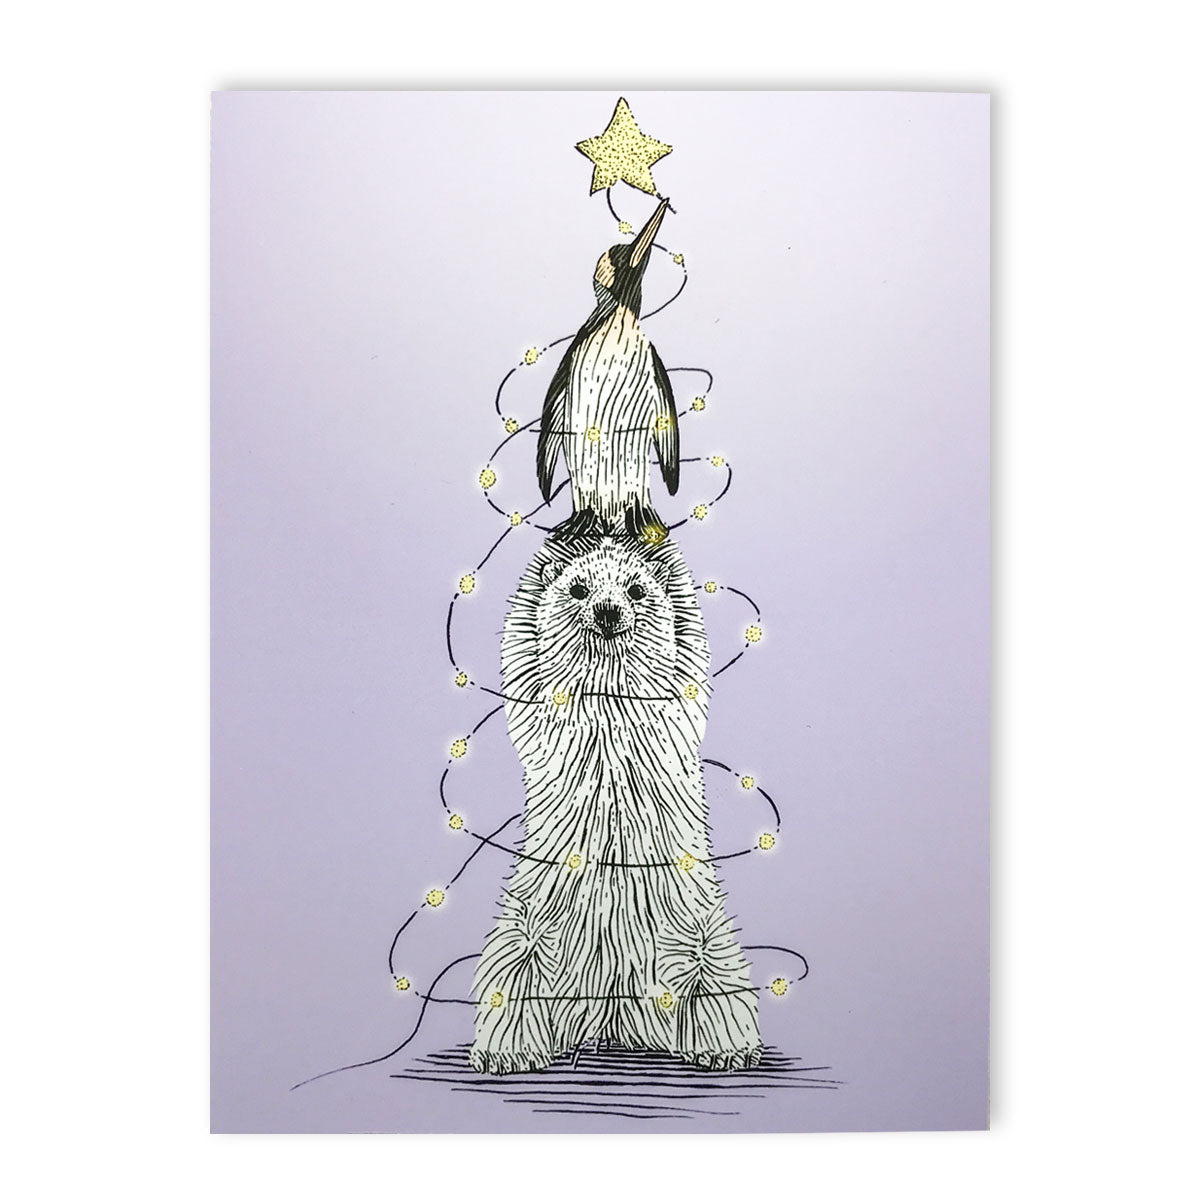 Note card Xmas - Oliver Stockley